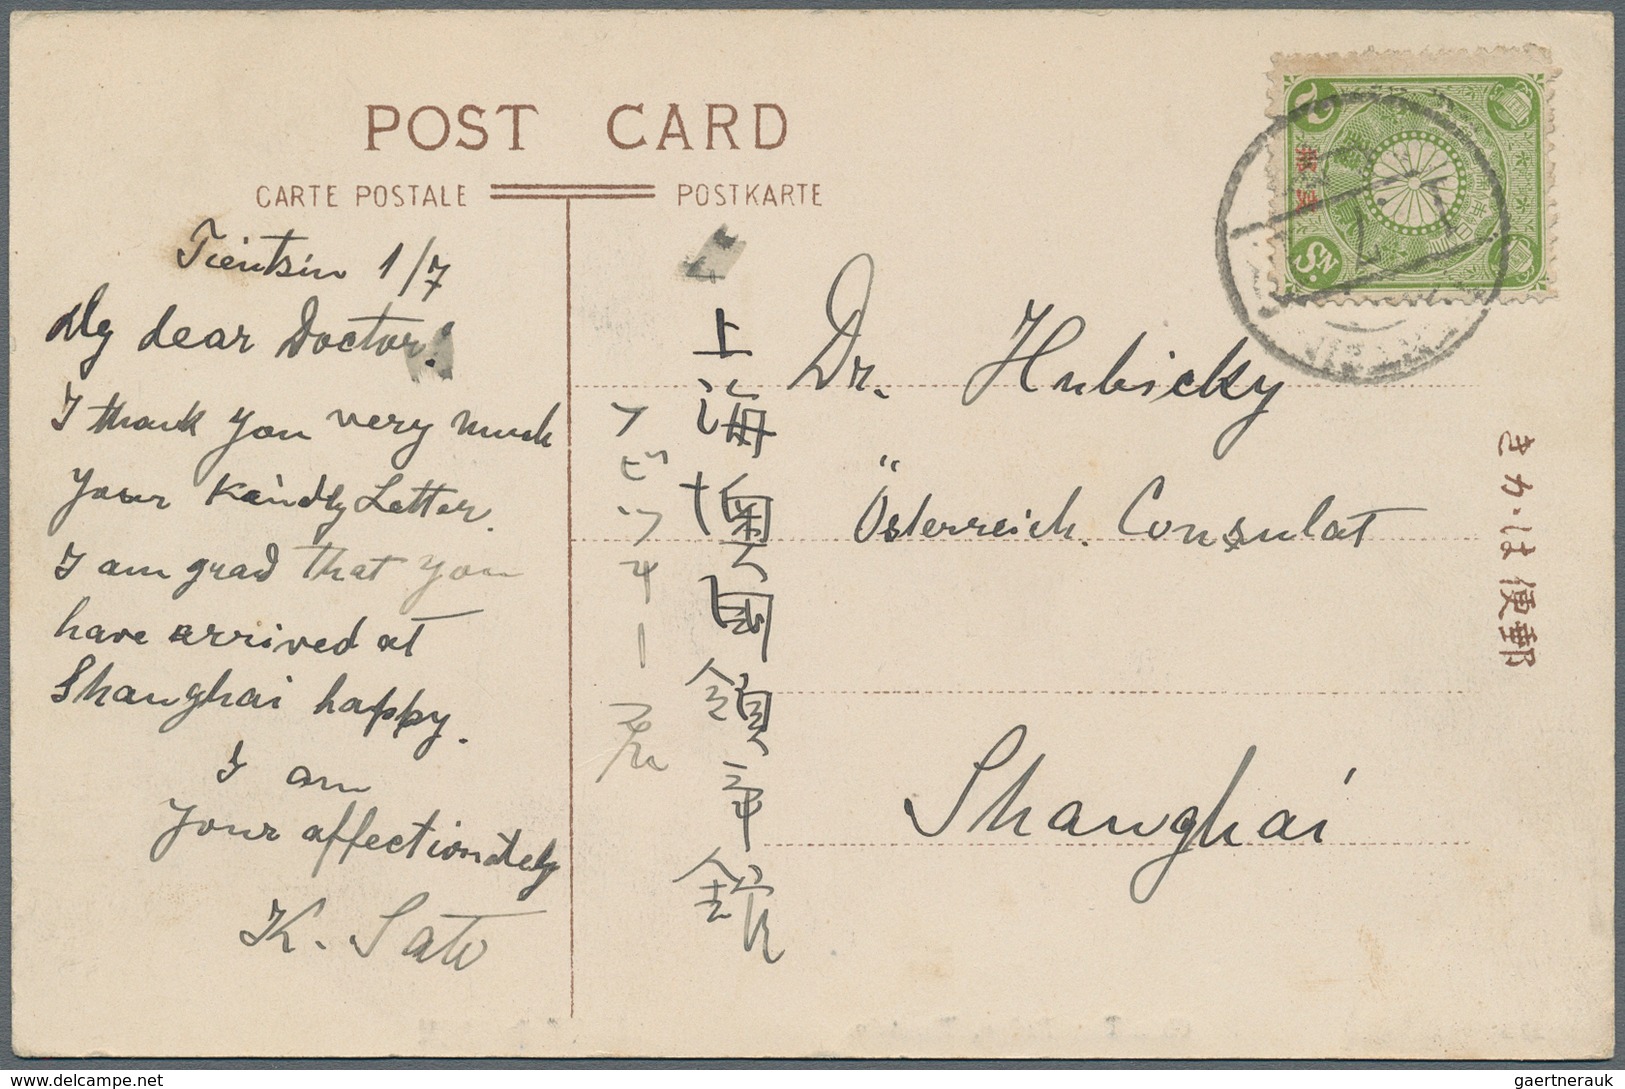 Japanische Post in China: 1891/1930, ppc (5), cover (1) and stationery (3, inc. cto "SHANGHAI J.P.O.